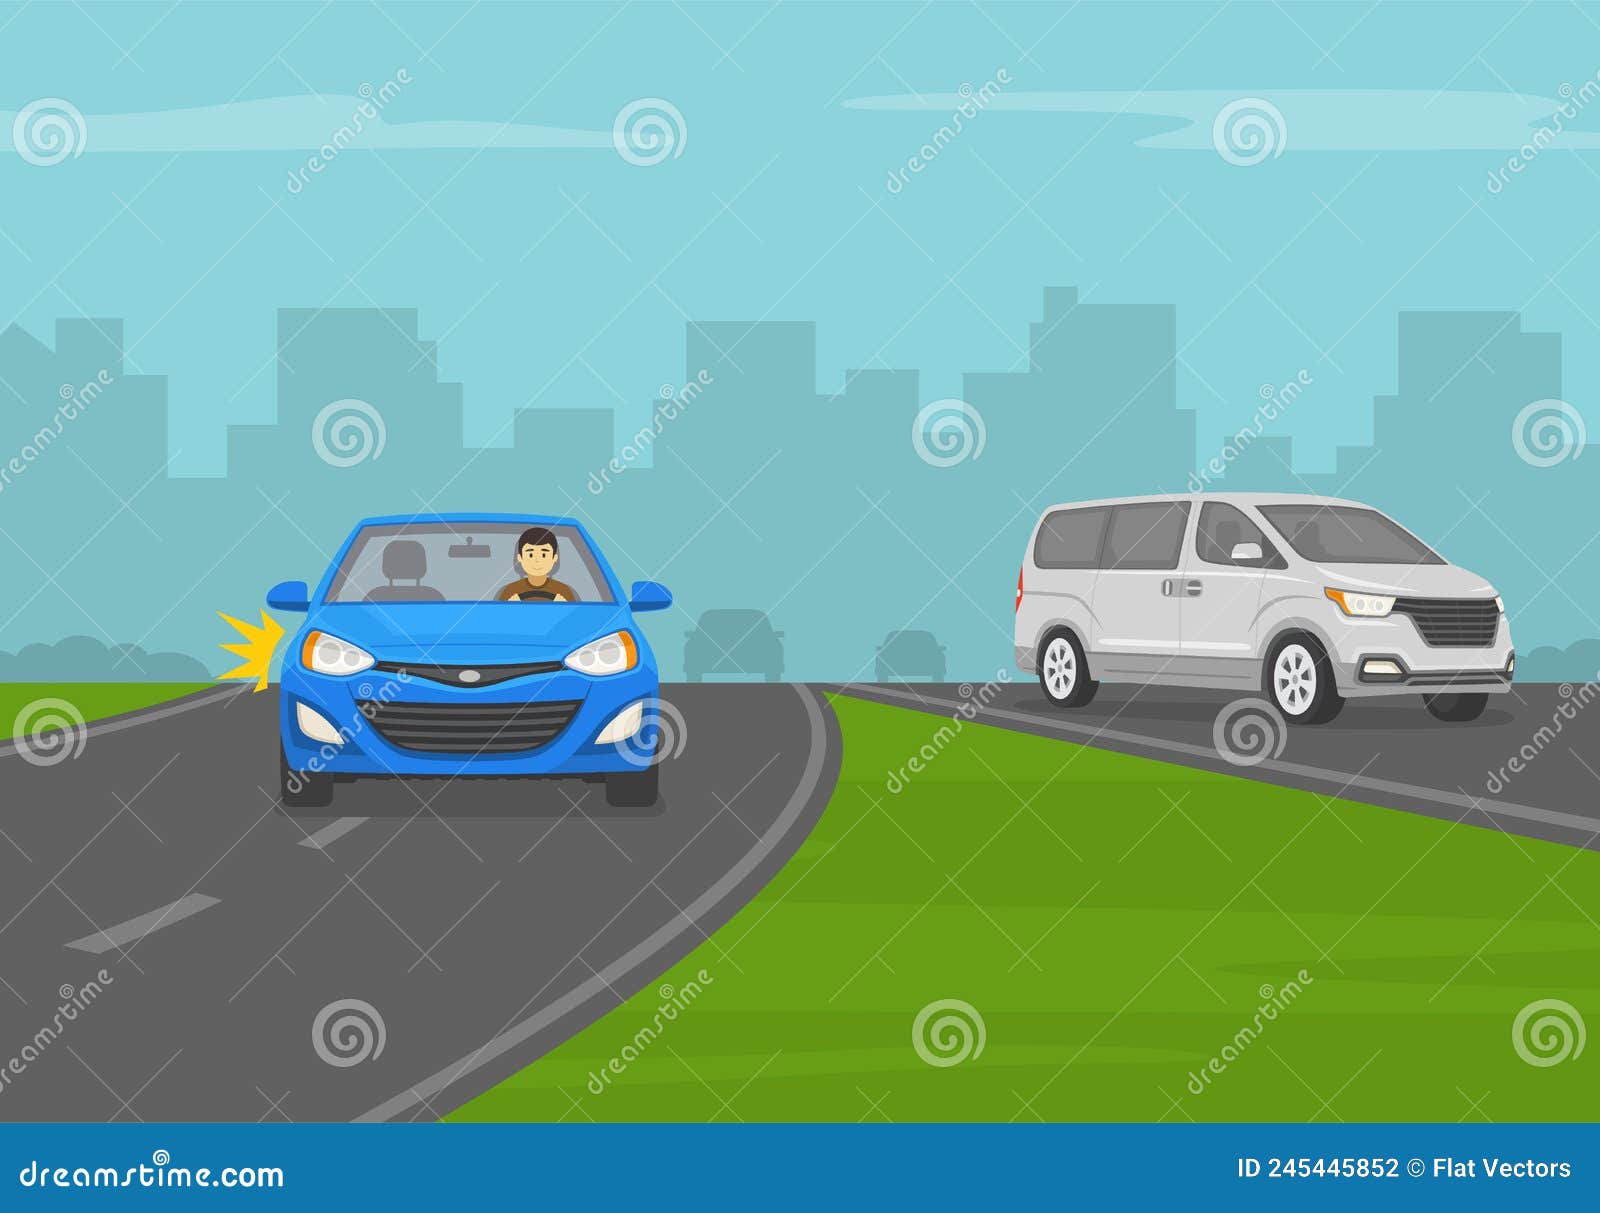 off-ramp driving. merging with traffic. blue sedan car exiting a highway. front view.